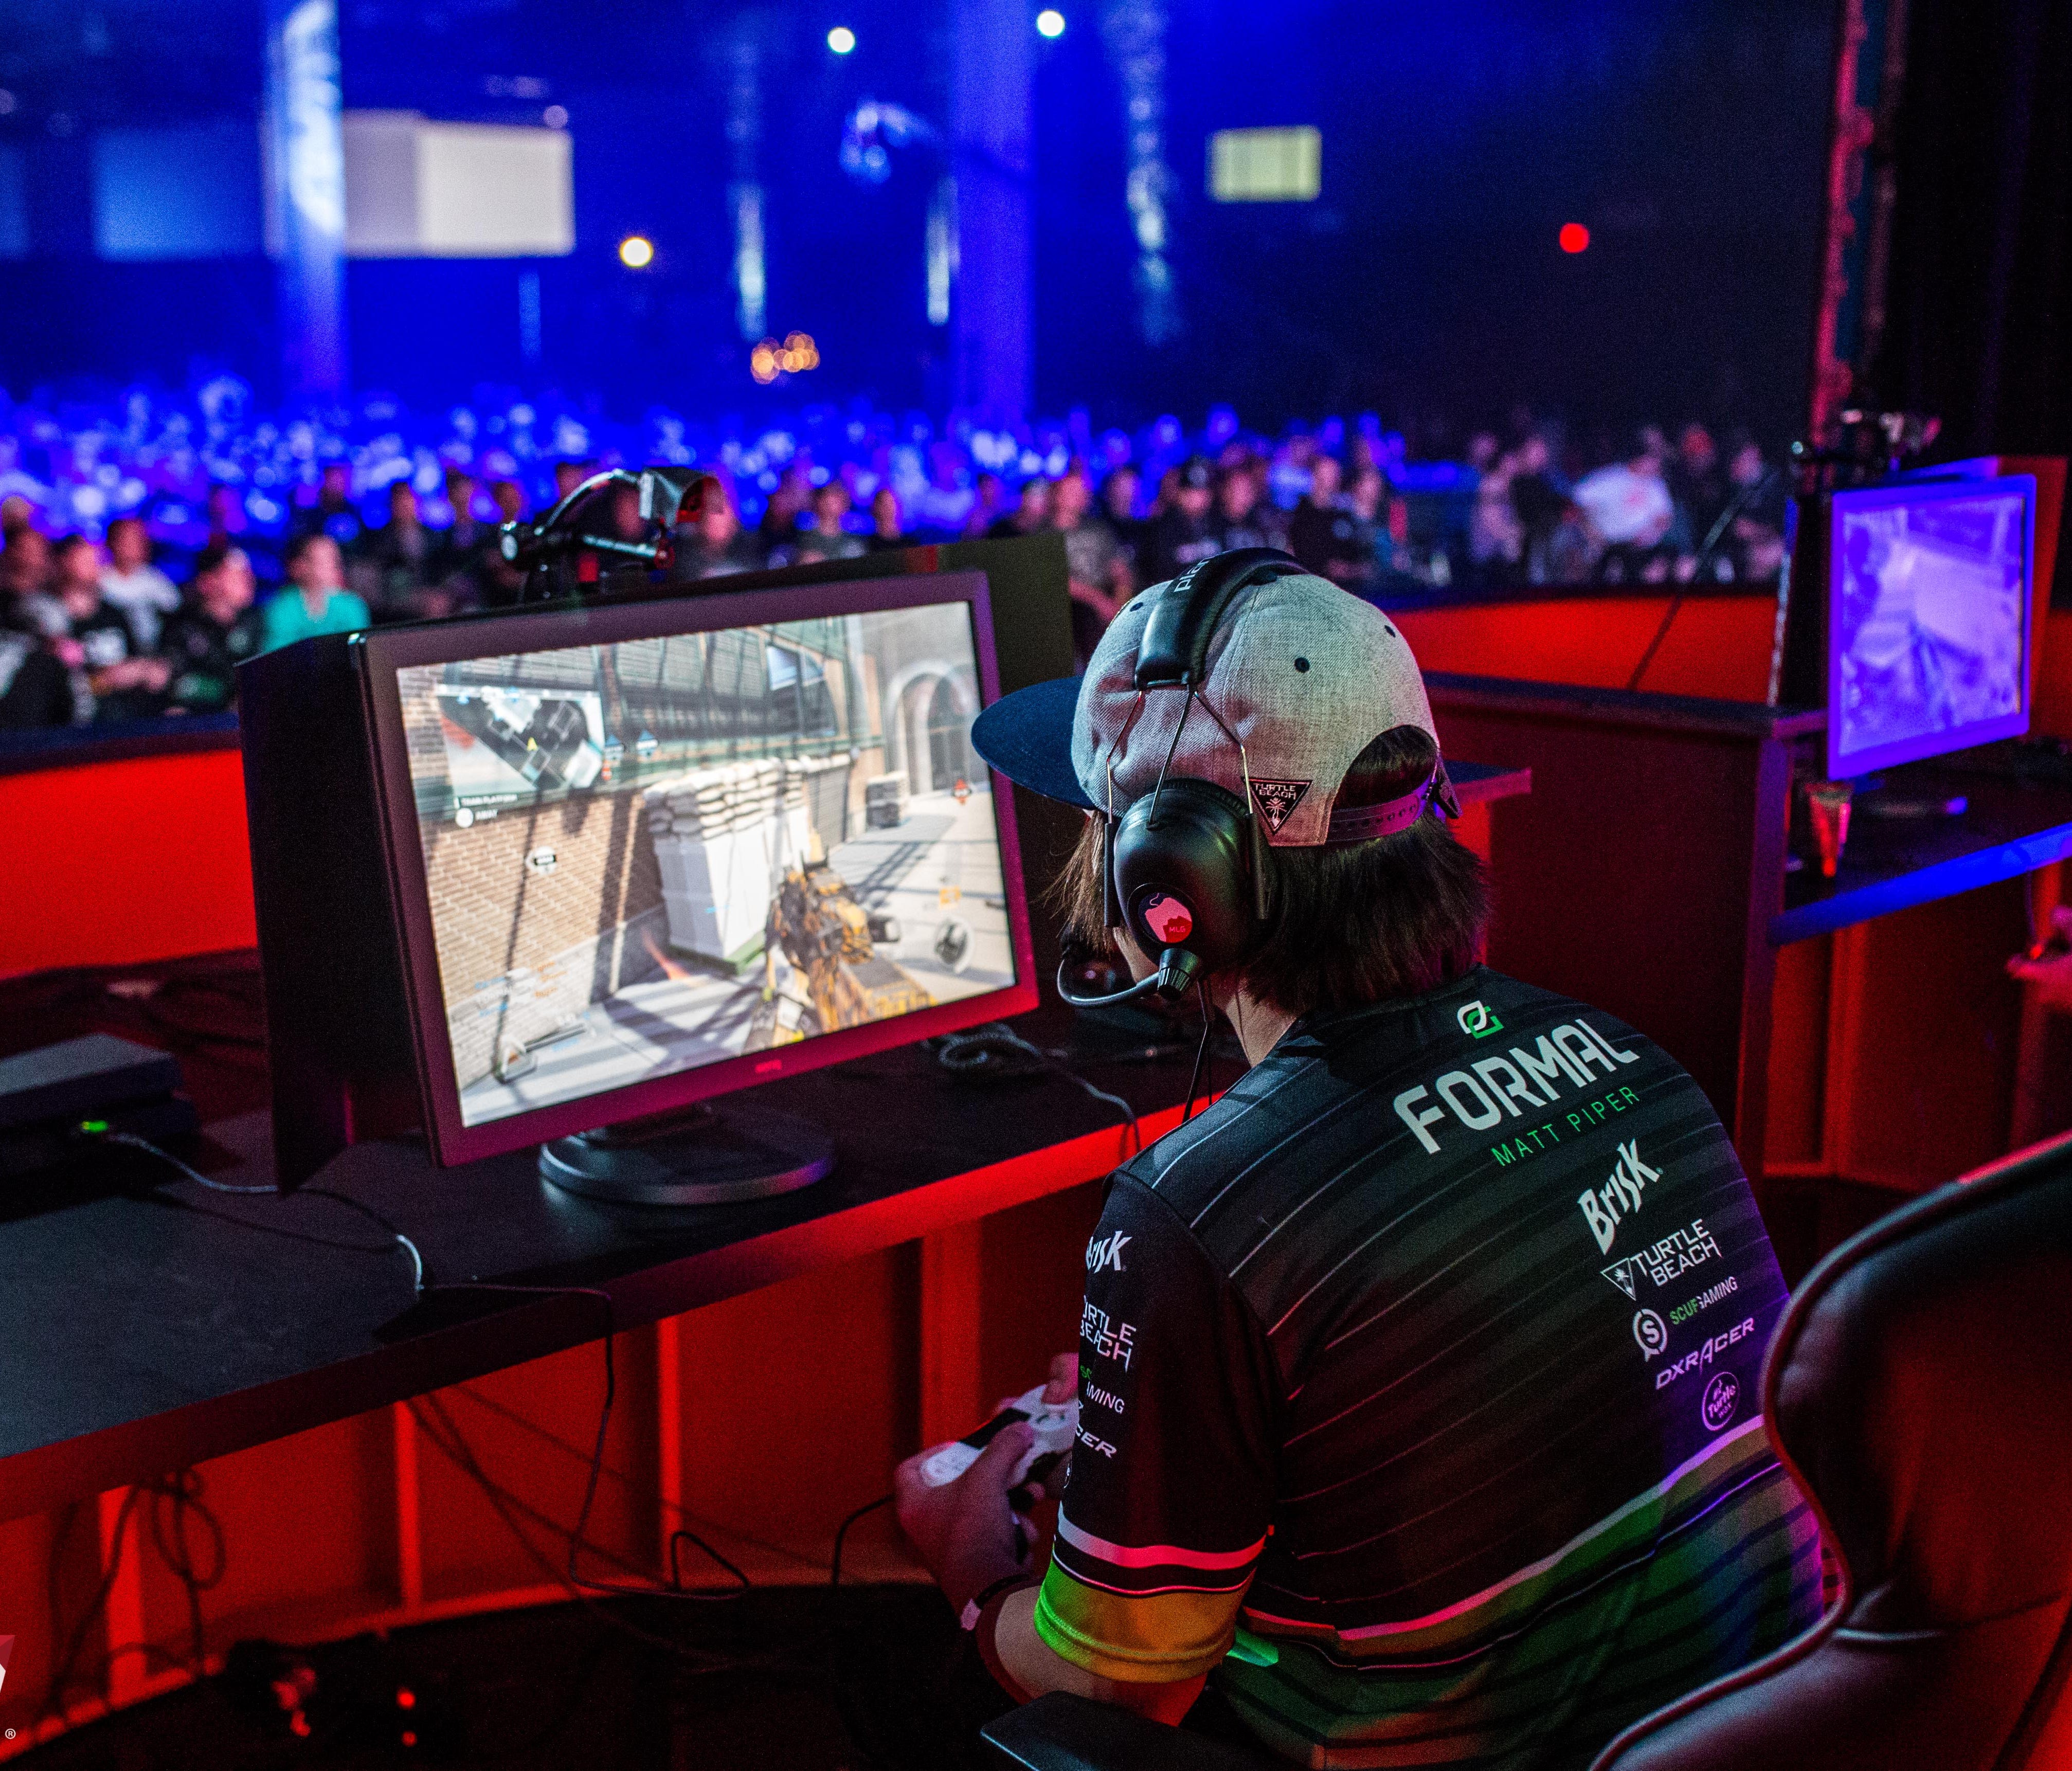 The CWL Anaheim Open, latest stop in Major League Gaming's Call of Duty World League tour, was well attended by competitors and fans.